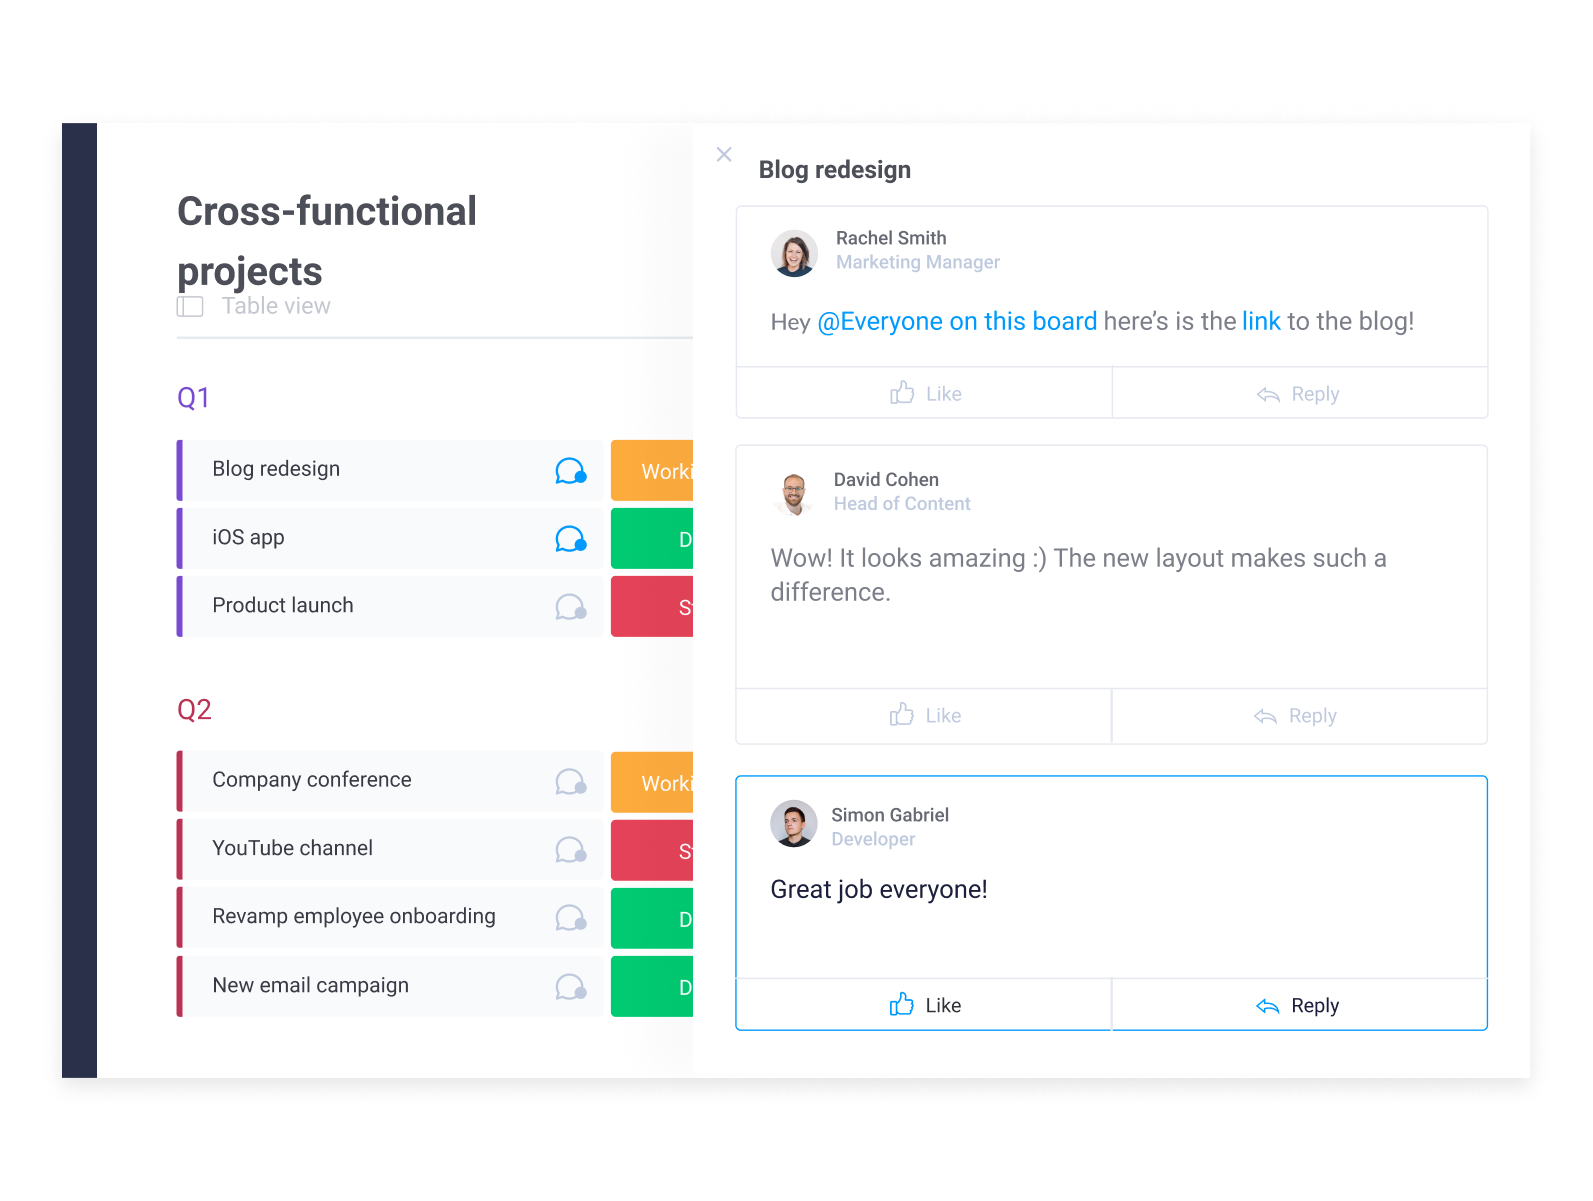 monday.com Software - A new way to manage your Projects!
Plan. Organize. Track. In one visual, collaborative space.